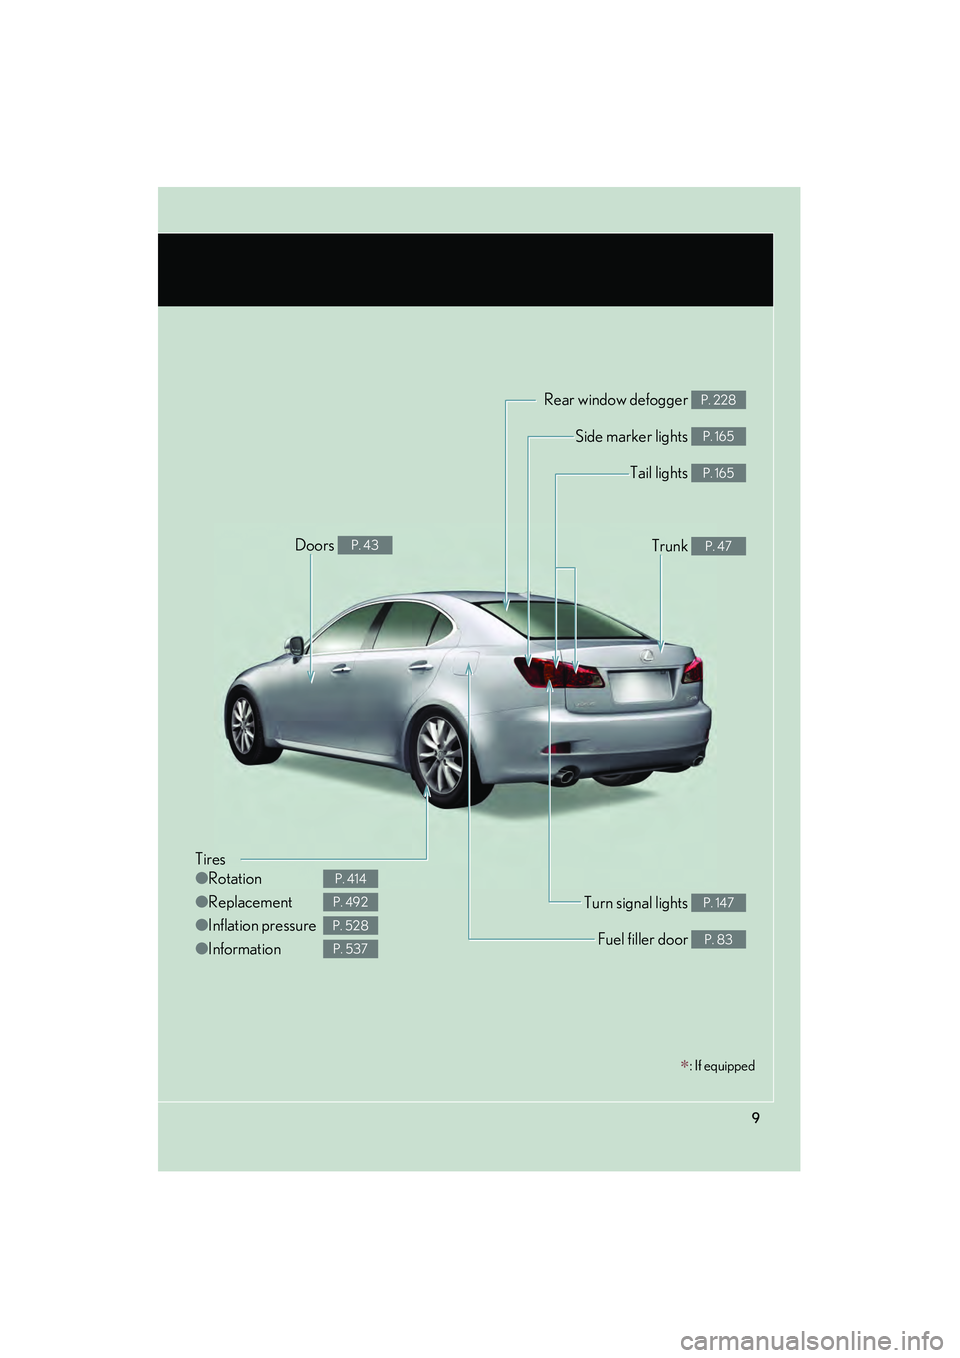 Lexus IS250 2010  Owners Manual IS350/250_U
9
∗: If equipped
Tires
●Rotation
● Replacement
● Inflation pressure
● Information
P. 414
P. 492
P. 528
P. 537
Tail lights P. 165
Side marker lights P. 165
Trunk P. 47
Rear window